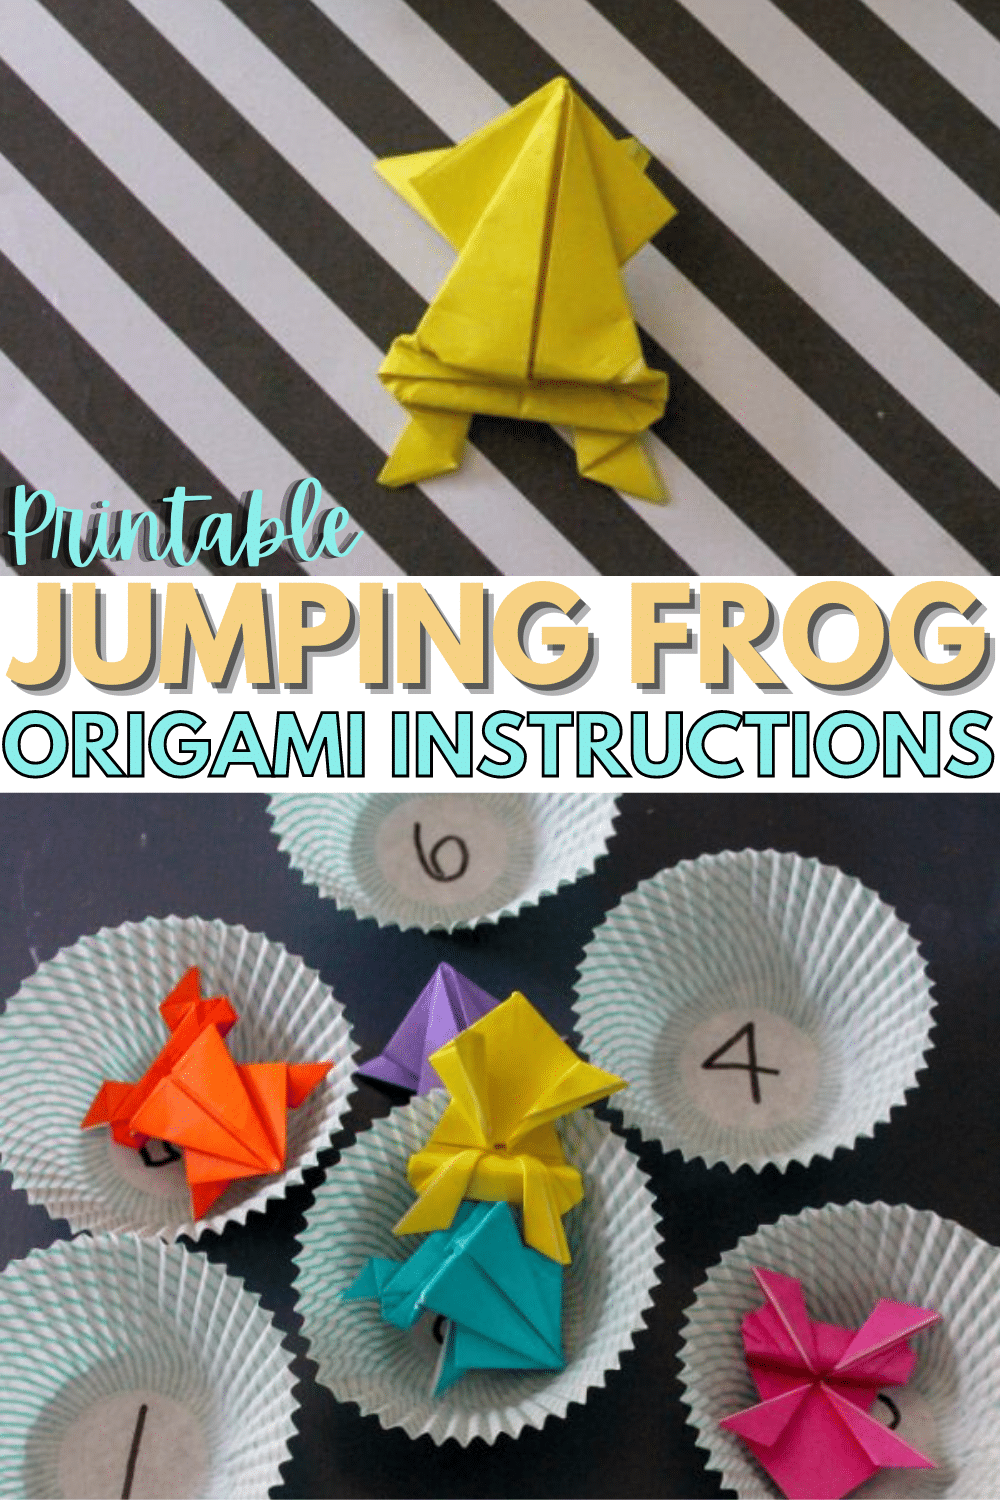 These jumping origami frog instructions are easy to follow and your whole family can have fun playing games with these little paper frogs. #origami #printables #paperfolding via @wondermomwannab